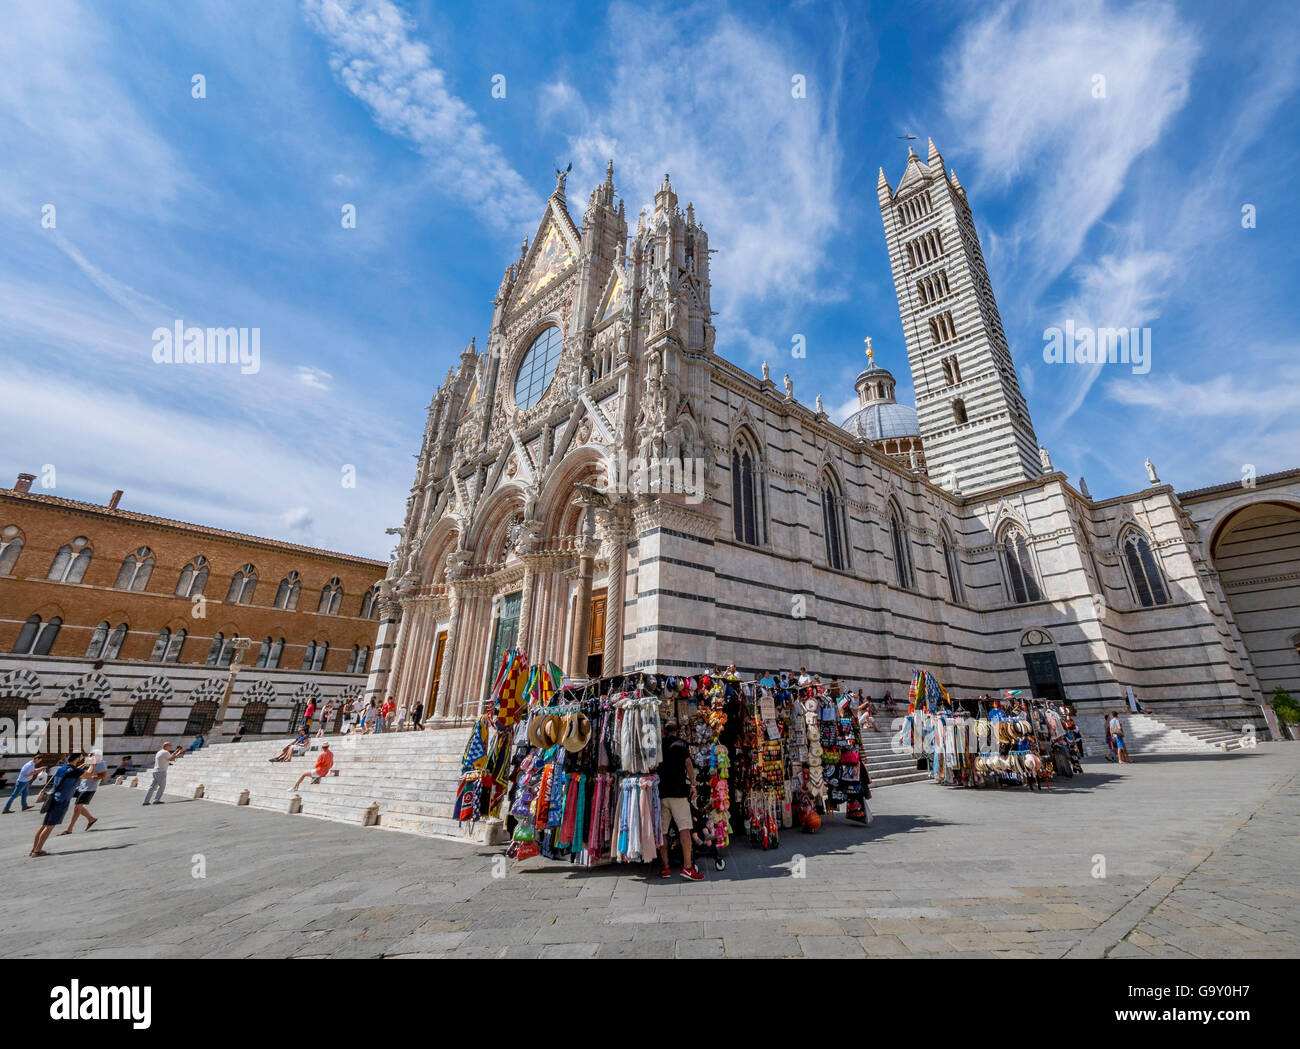 Siena Cathedral, Cattedrale di Santa Maria Assunta, in white and black marble, Old Town, Siena, Tuscany, Italy, Europe Stock Photo